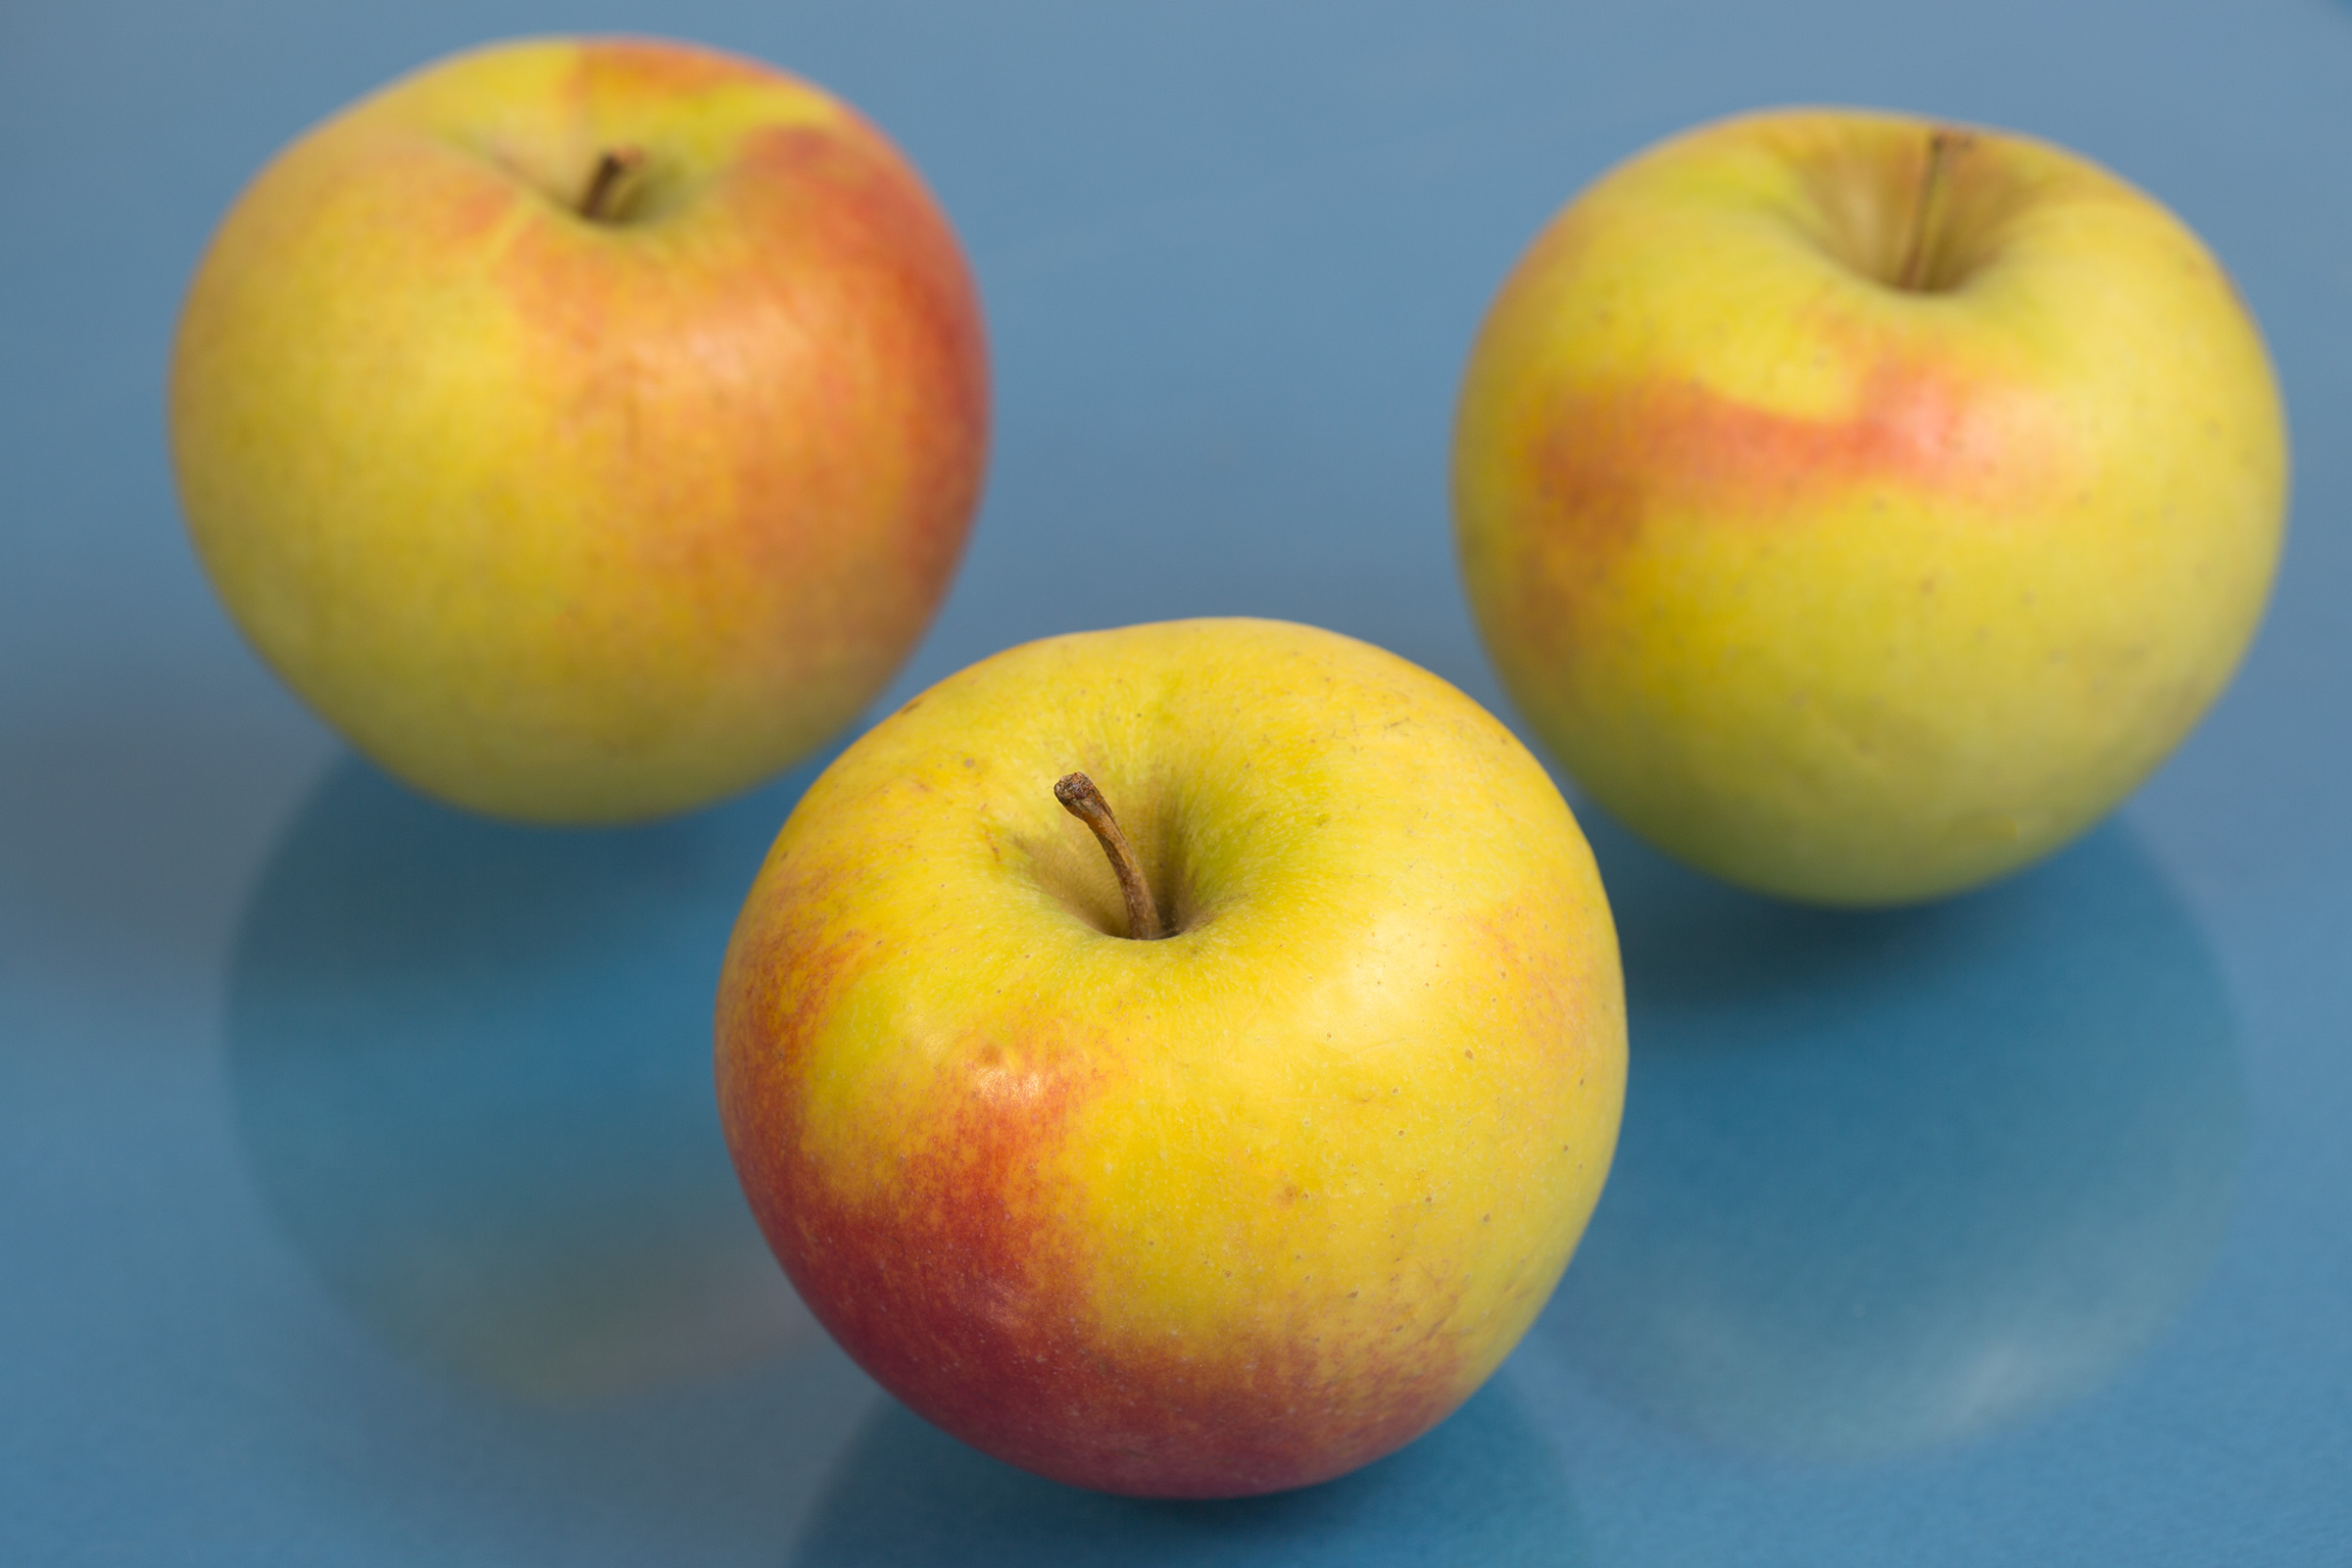 Honeycrisp apple losing its patent protection, but not its appeal